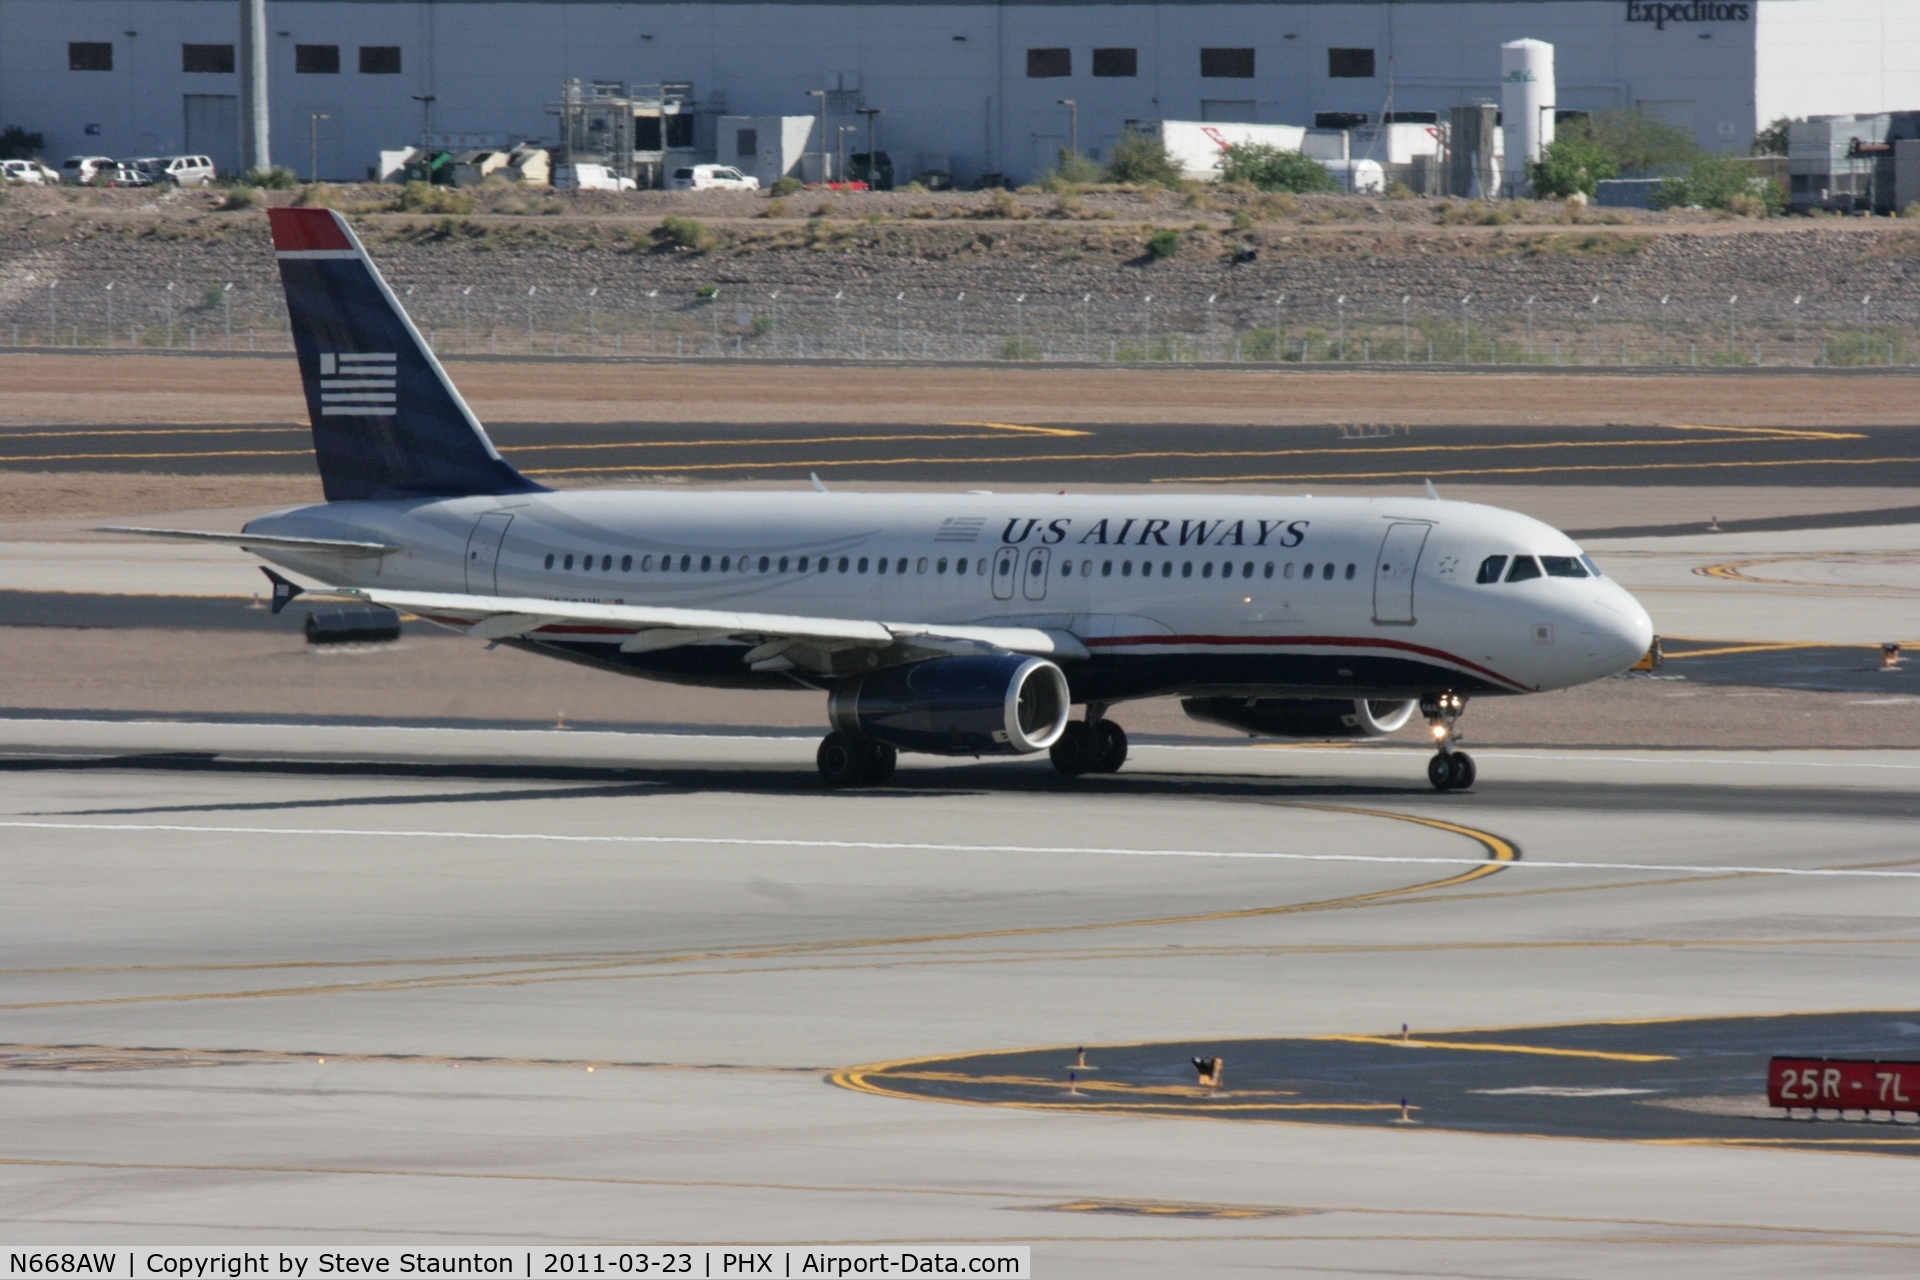 N668AW, 2002 Airbus A320-232 C/N 1764, Taken at Phoenix Sky Harbor Airport, in March 2011 whilst on an Aeroprint Aviation tour